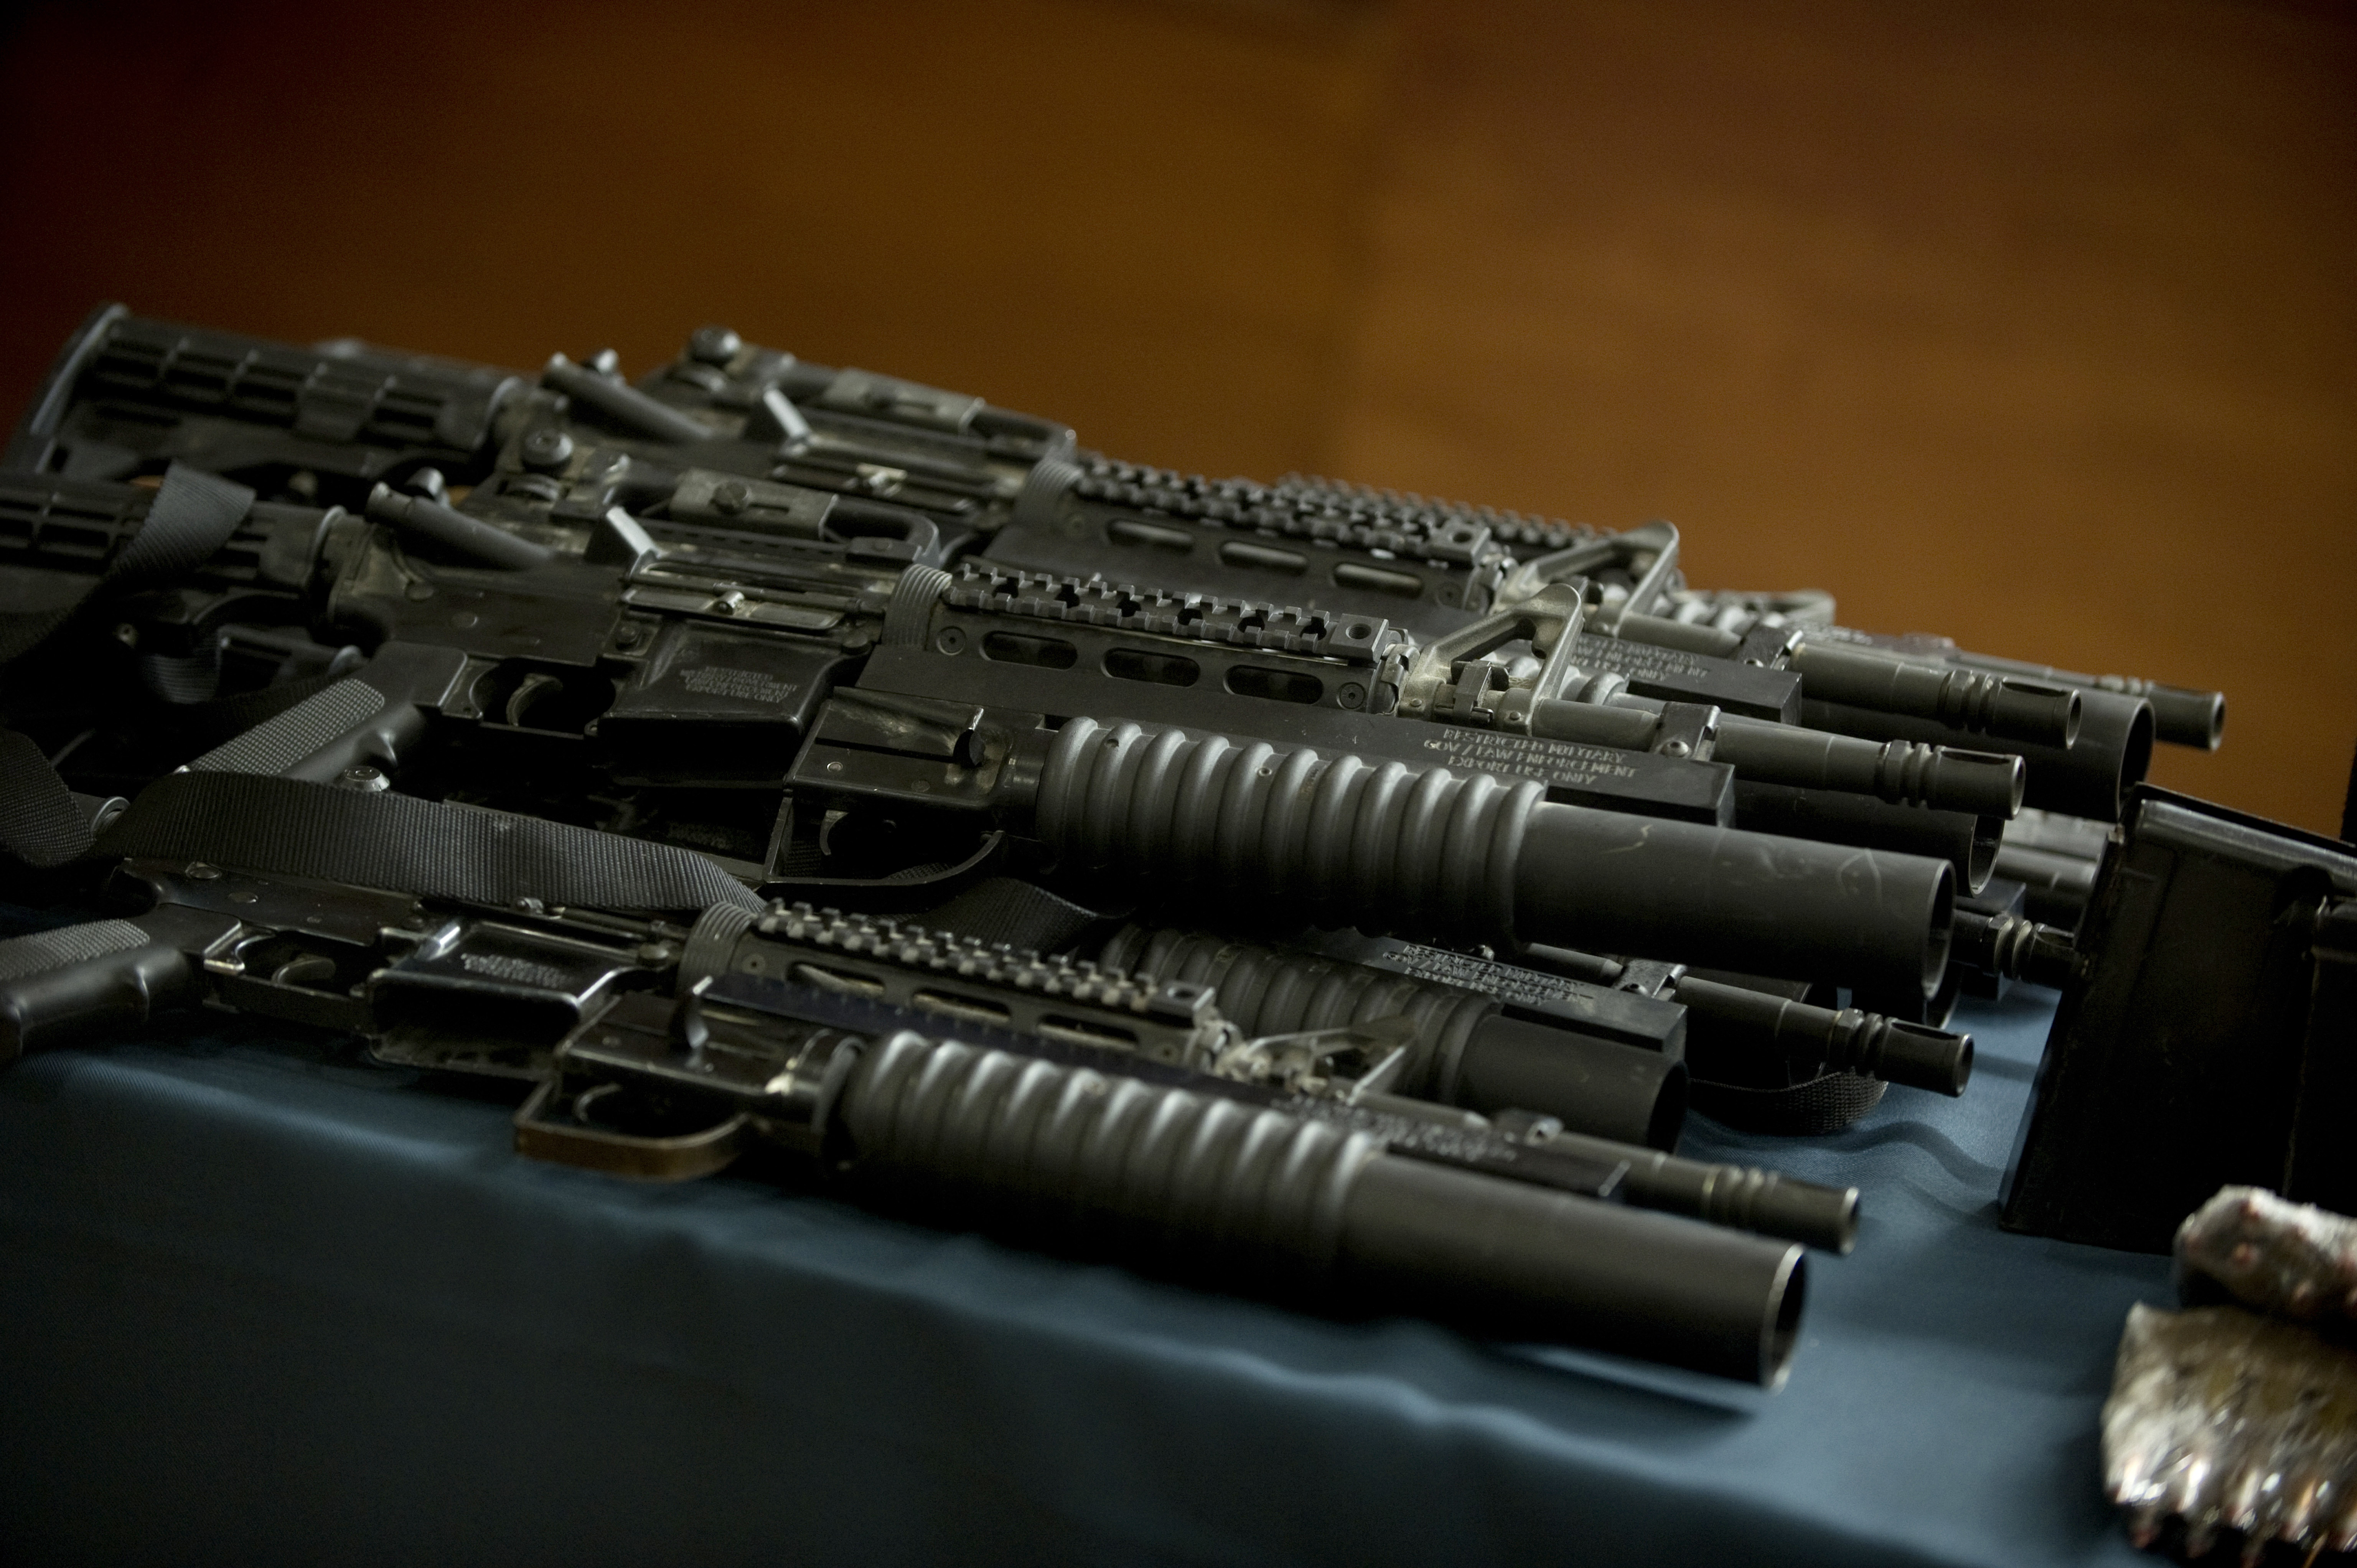 Some US made M4A1 rifles with grenade launchers, part of an arsenal seized to the leader of the drug cartel &quot;Cartel de Jalisco Nueva Generacion&quot;, Erick Valencia Salazar, are presented to the press on March 12, 2012 in Mexico City. Salazar, aka &quot;El 85&quot;, was arrested during a military operation in Guadalajara on March 9, 2012 with an arsenal of war weapons. Mexican officials have urged the United States for years to enact the type of gun control proposed by President Barack Obama, arguing that drug gangs were using US-made assault rifles in brutal turf wars. Analysts, however, say the measures unveiled on January 16, 2013 would do little to stem Mexico's wave of gangland killings for now, since drug cartels have built an arsenal of military-style guns to outgun local police. AFP PHOTO/  Yuri CORTEZ        (Photo credit should read YURI CORTEZ/AFP/Getty Images)